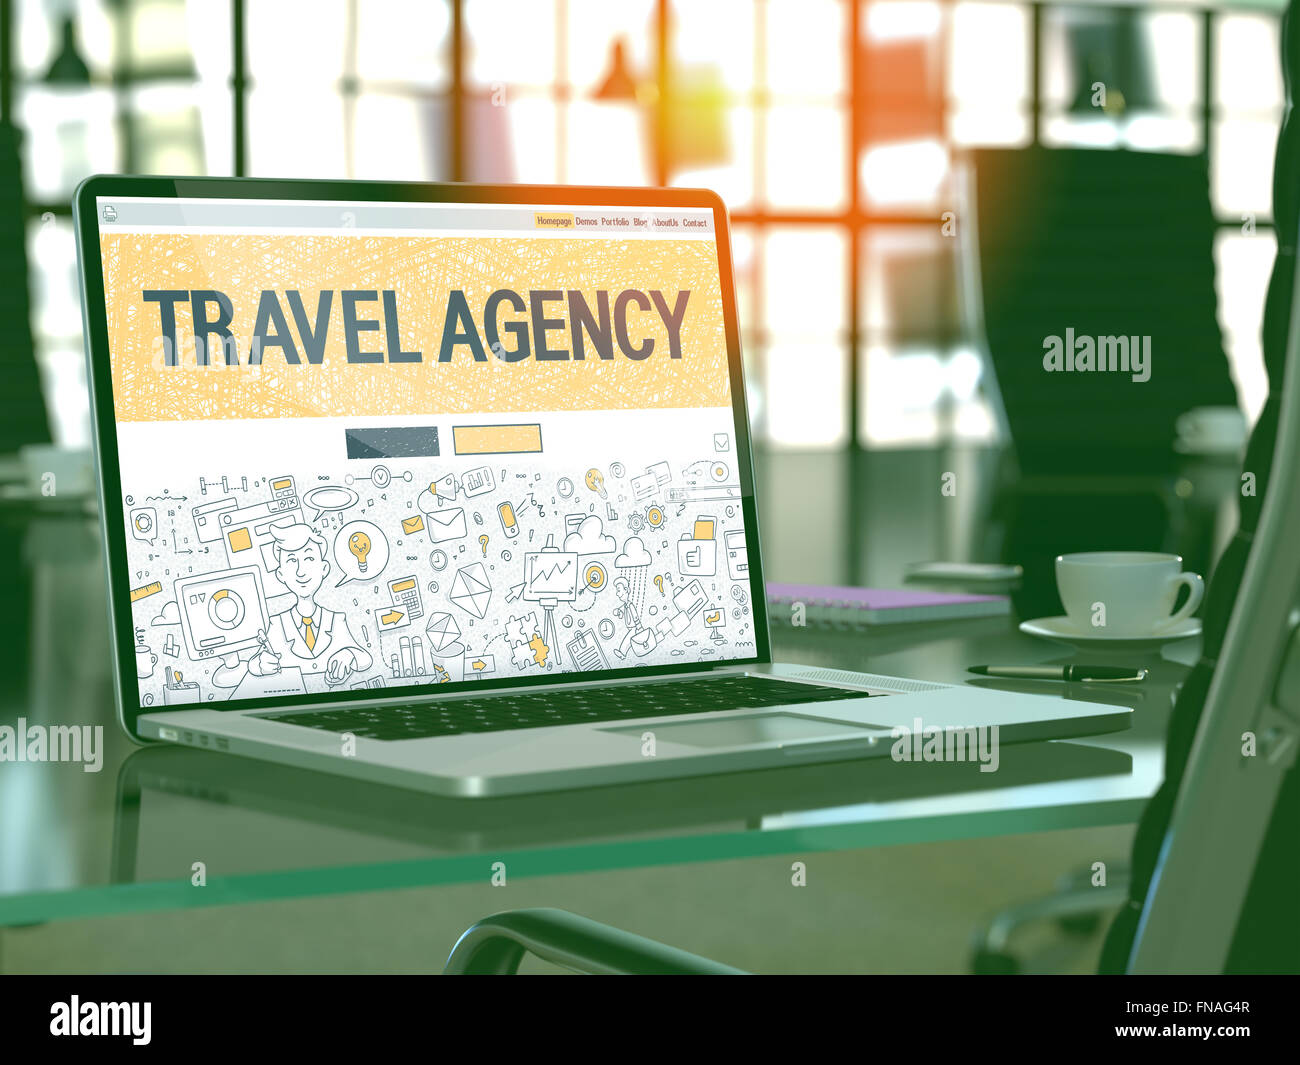 Travel Agency Concept on Laptop Screen. Stock Photo